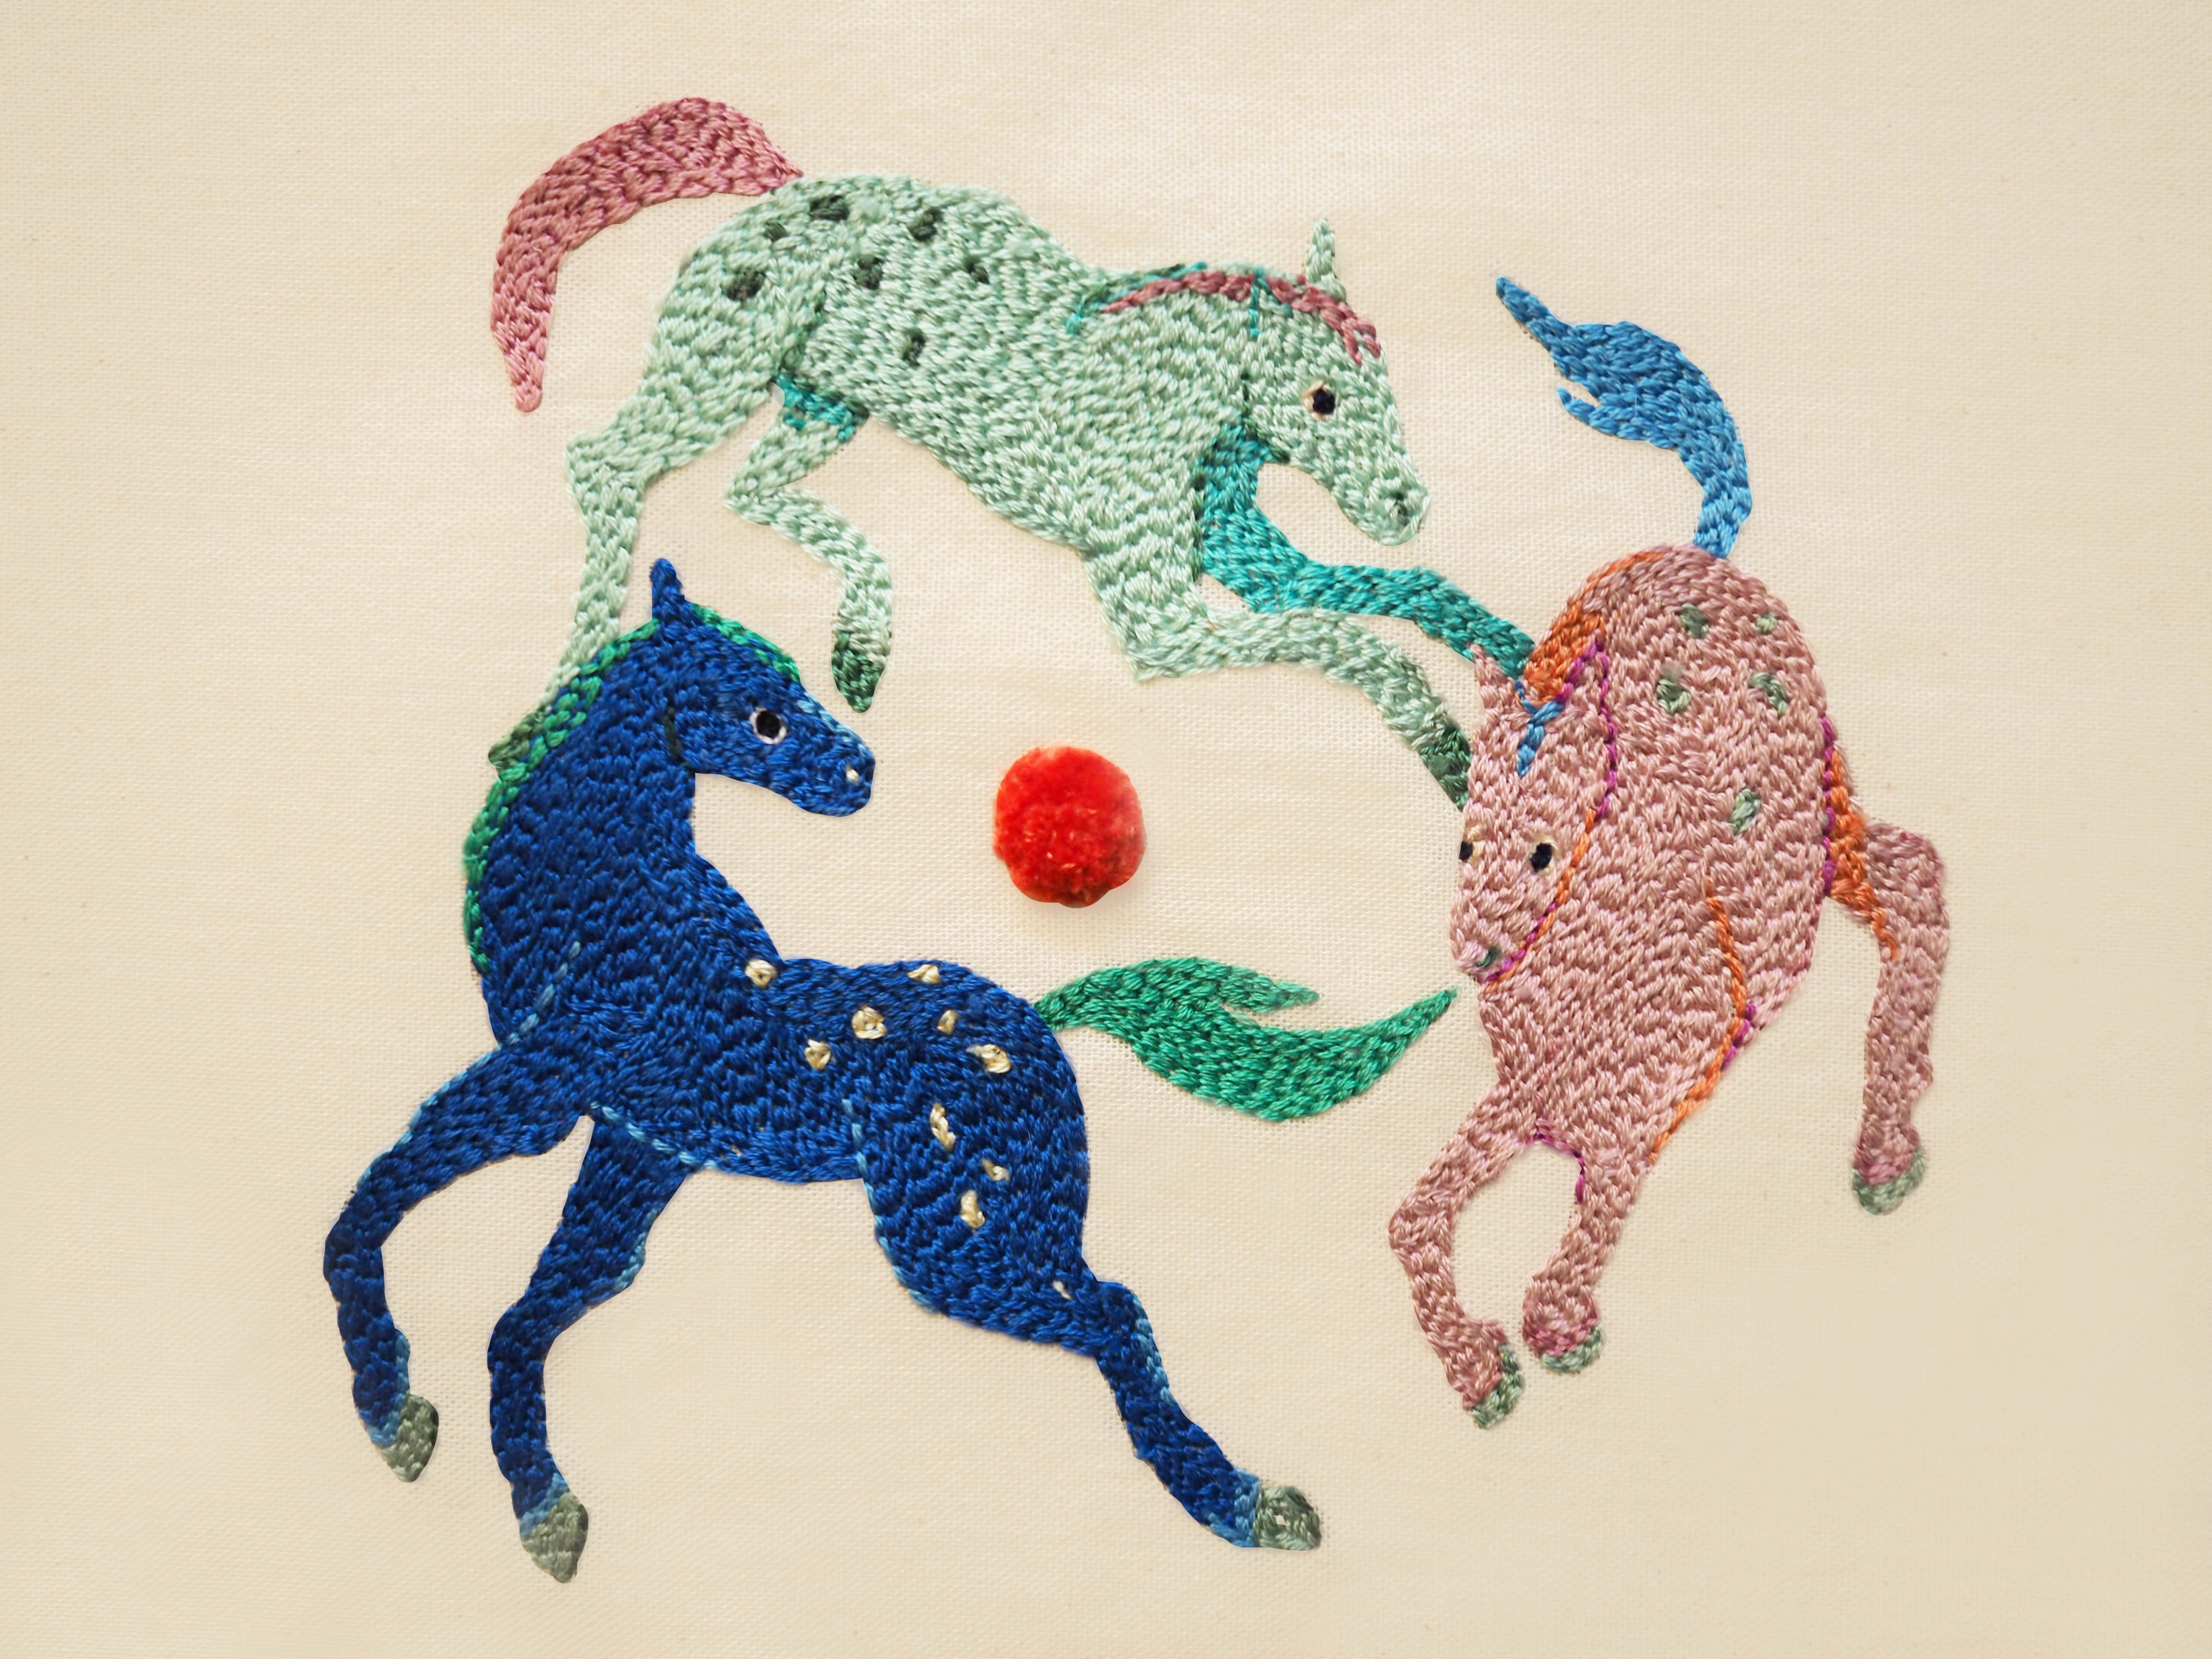 Embroidery work, from “SOFT SPOT” 2023